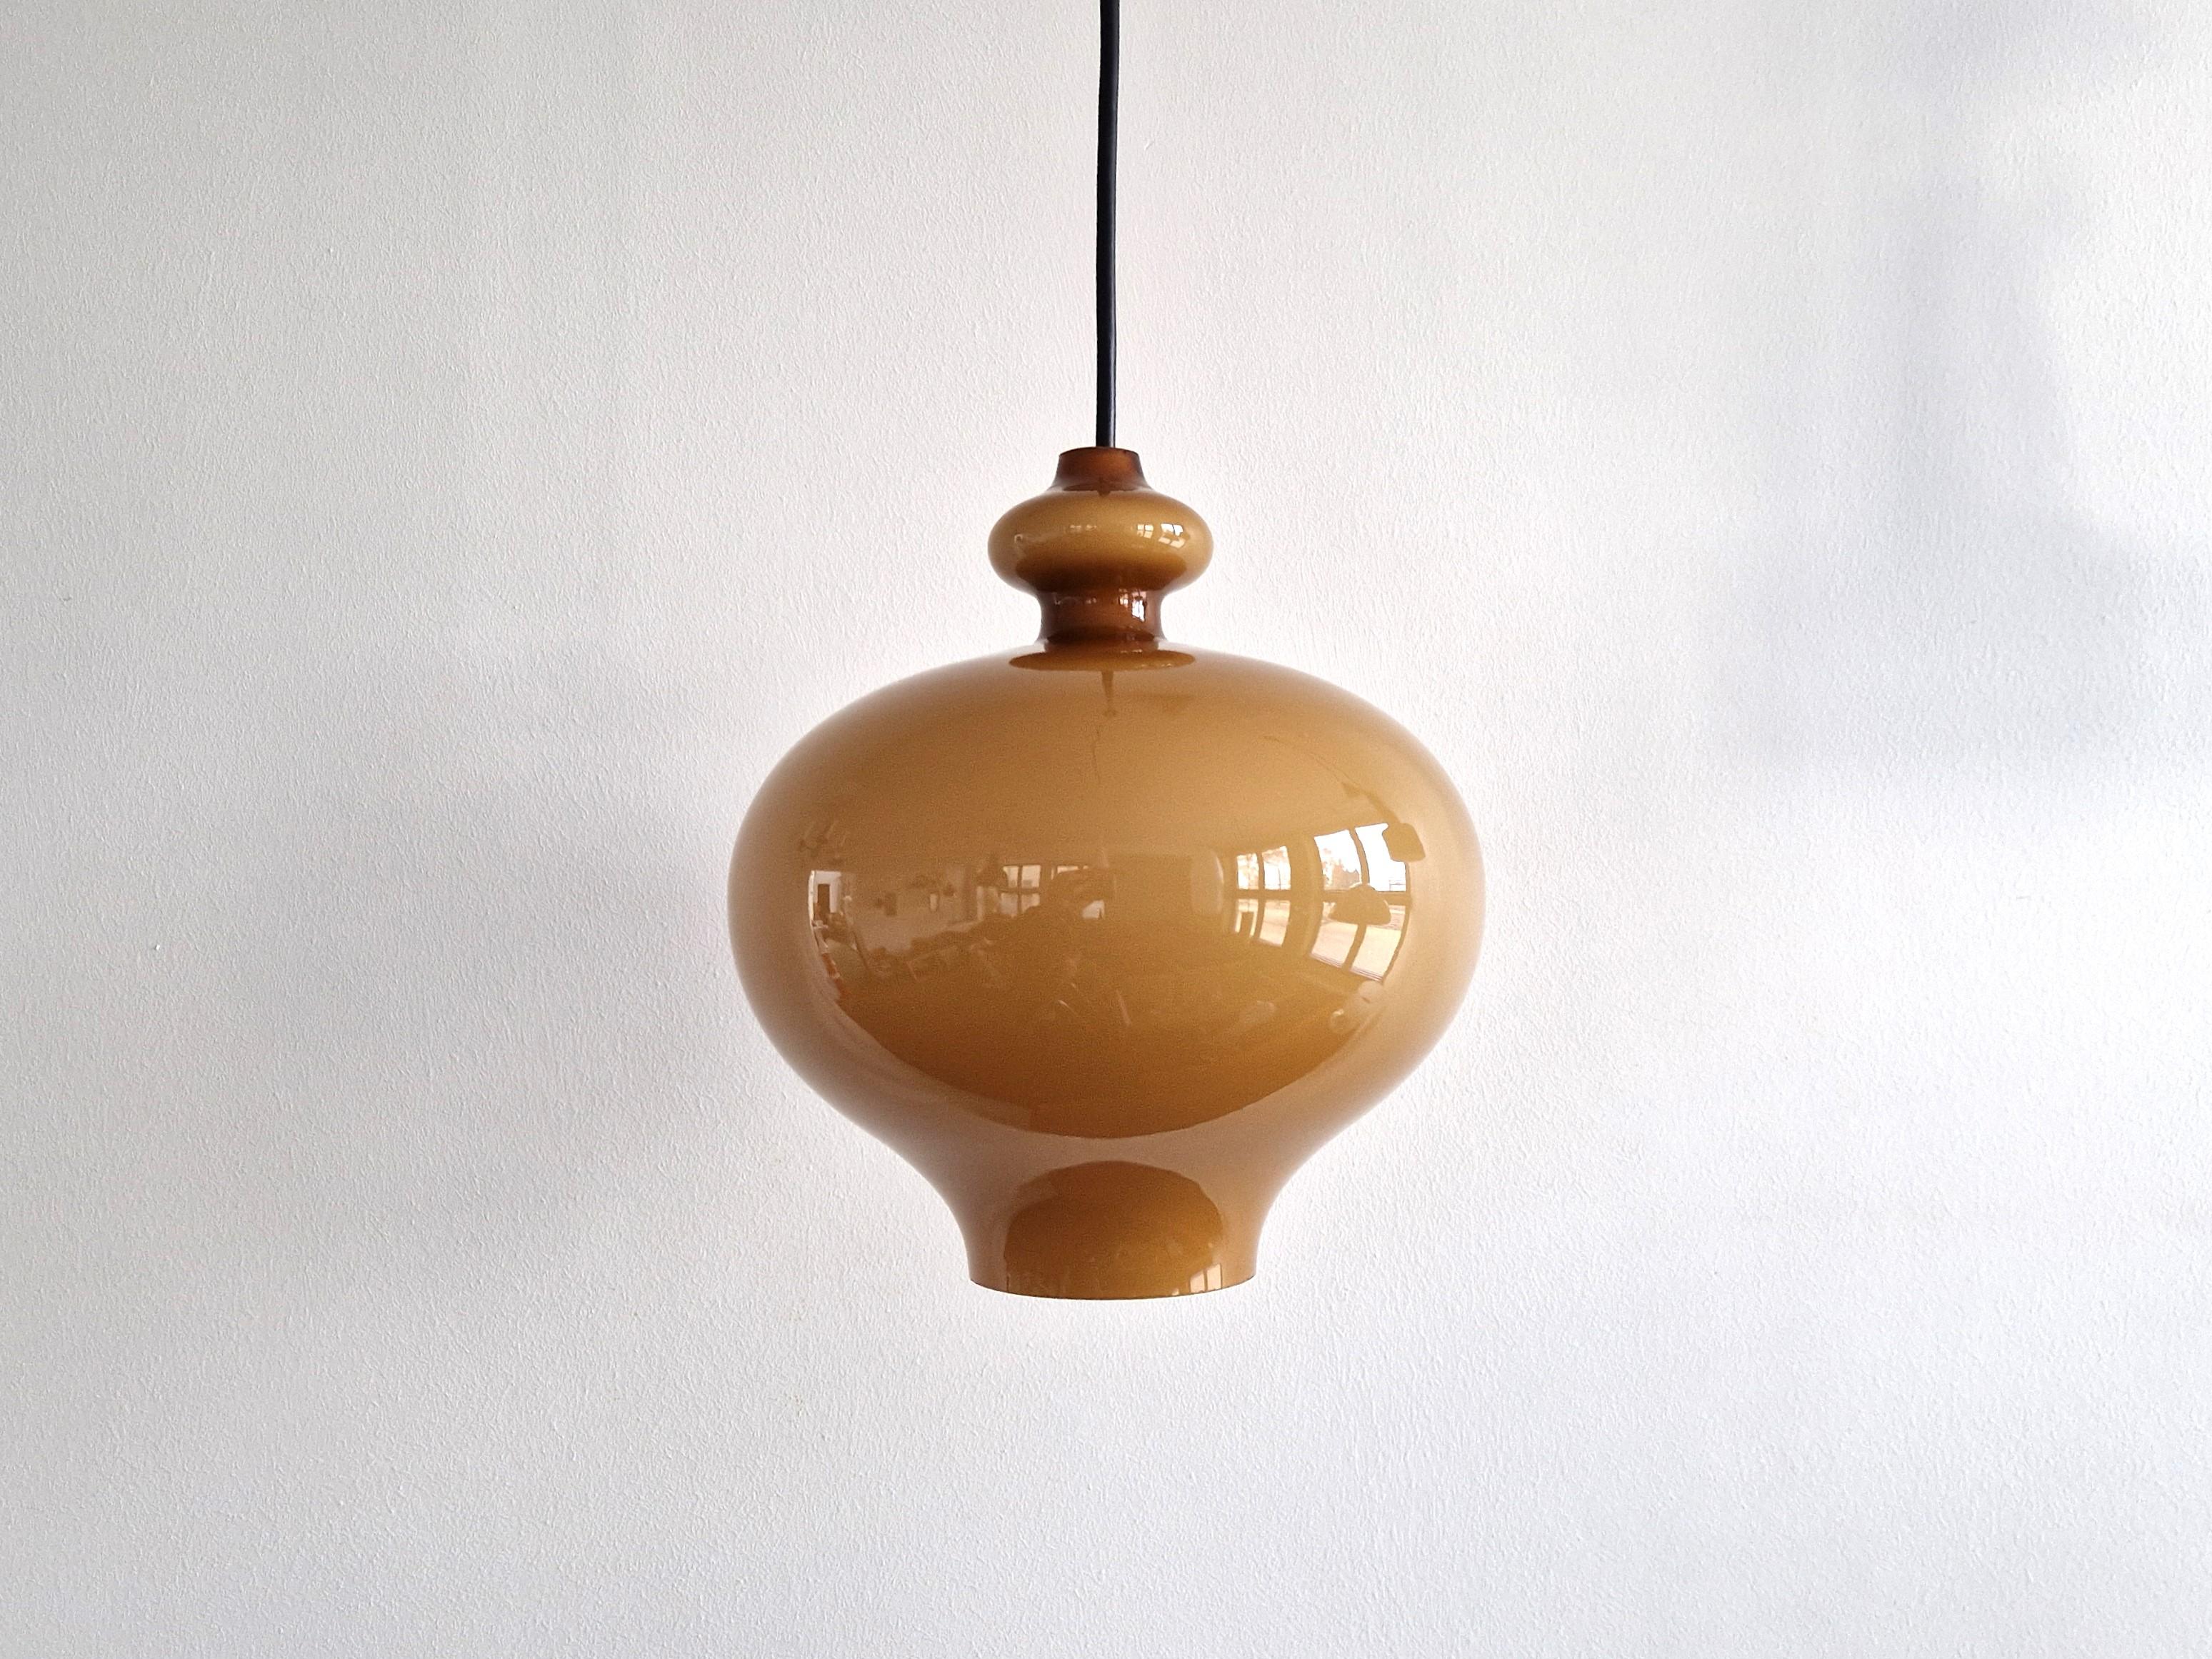 This beautiful round shaped glass pendant lamp was designed by Hans Agne Jakobsson for Staff Leuchten in the 1970's. It is a warm caramel brown colored glass shade with an opaline inside for a beautiful softened light. This lamp is in a very good